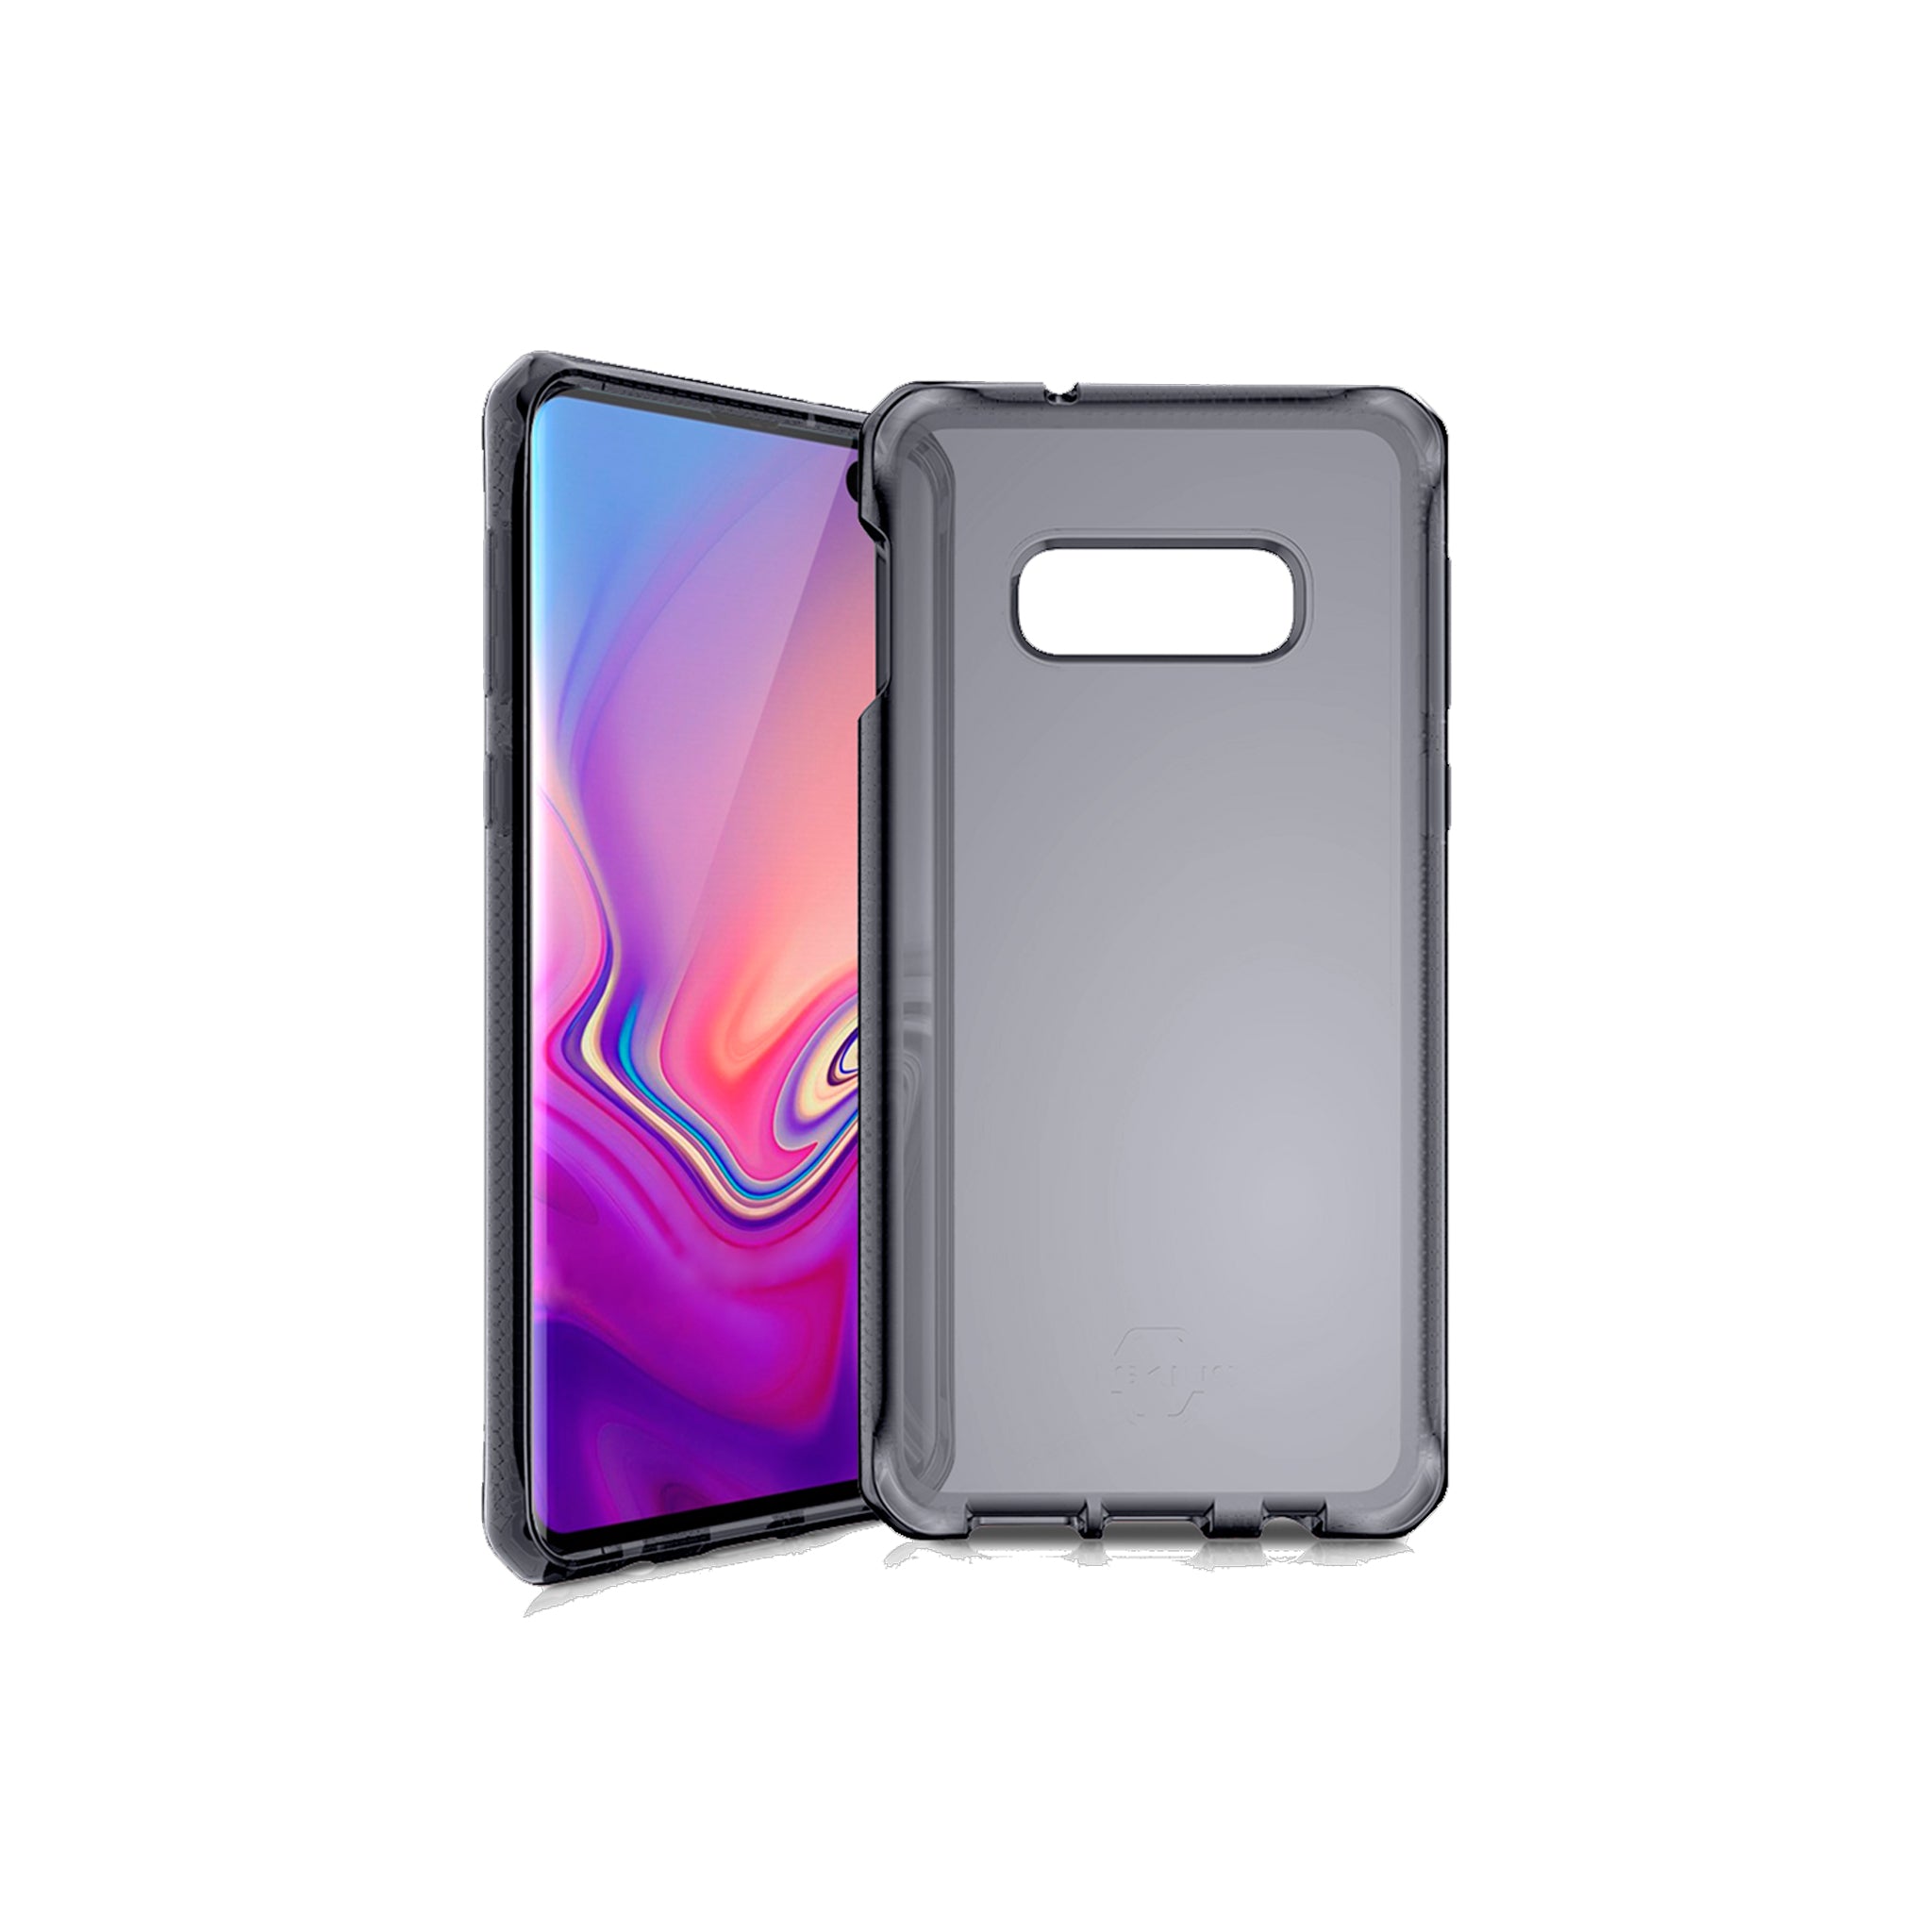 Itskins - Spectrum Clear Case For Samsung Galaxy S10e - Black